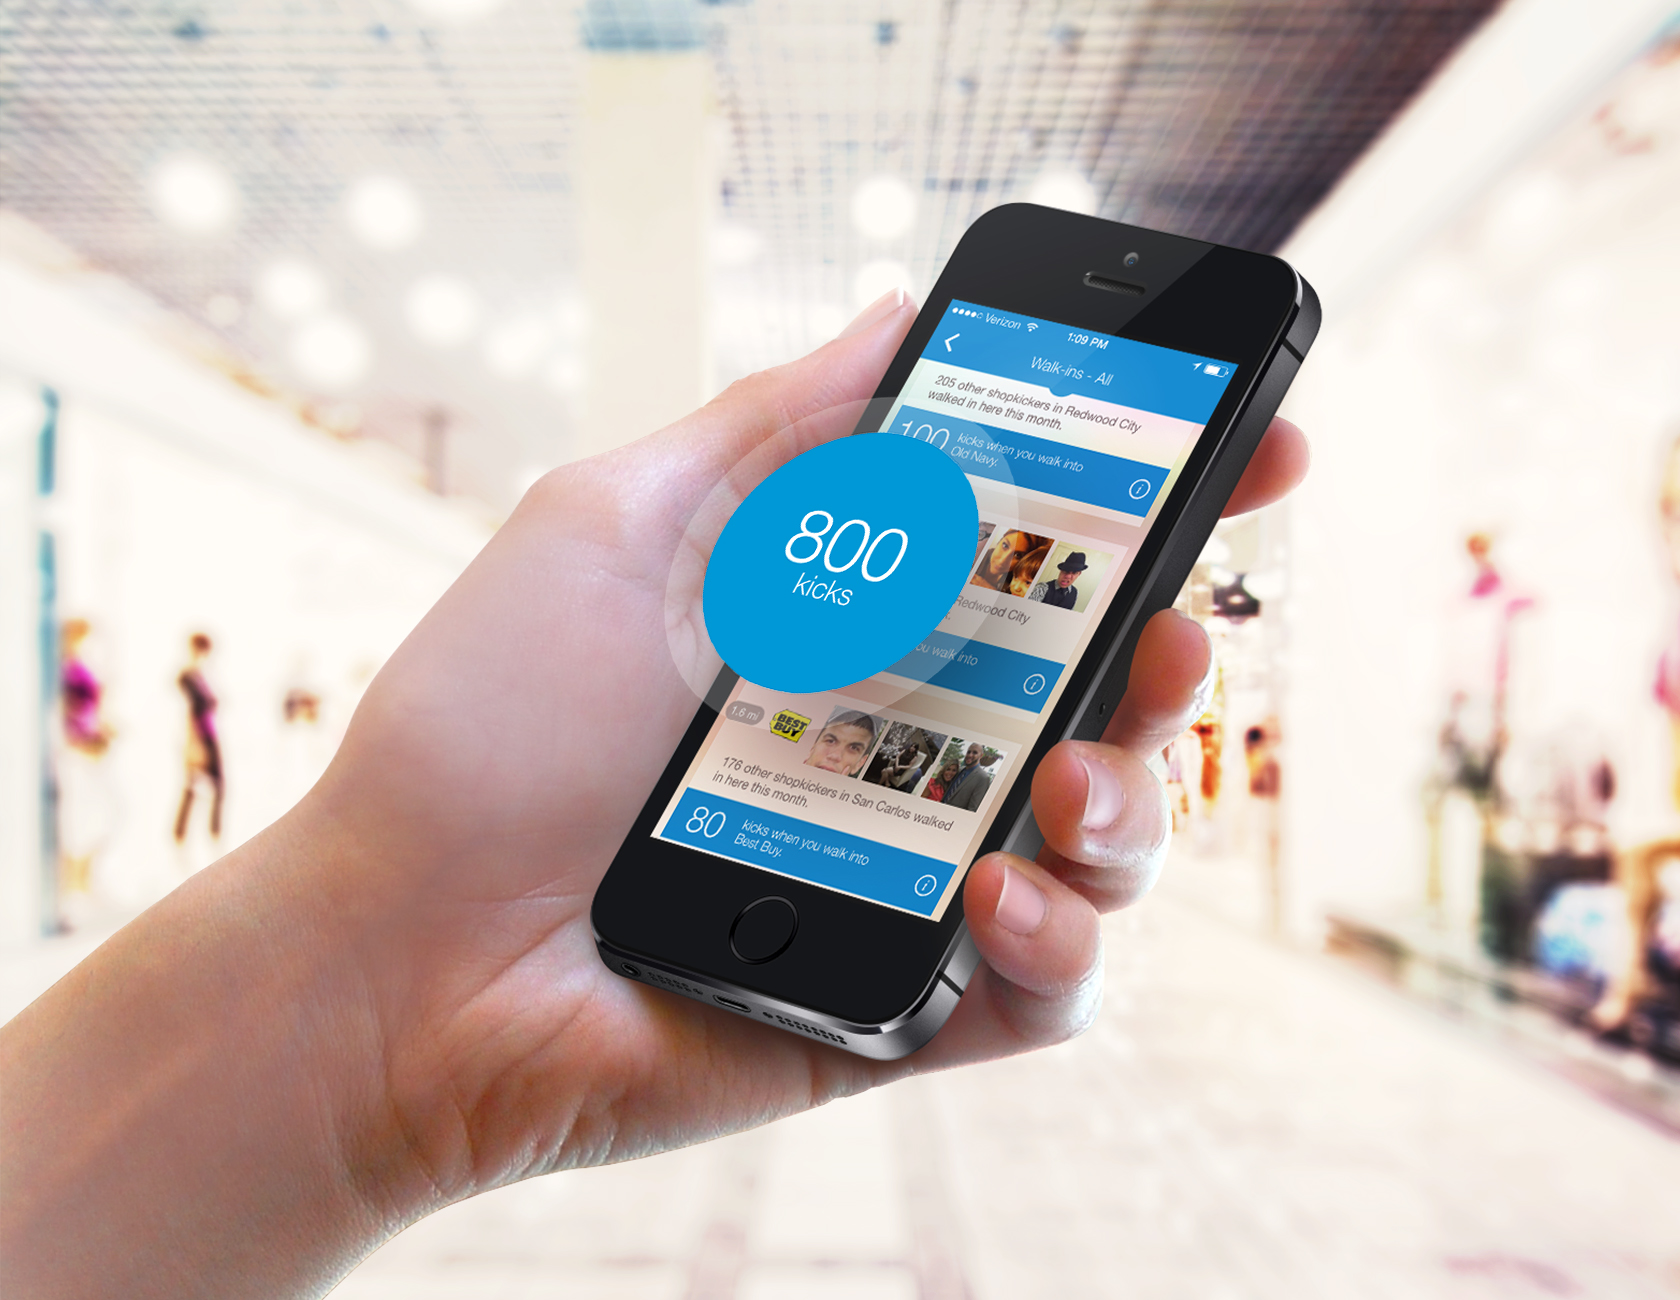 hand holding a phone with shopkick app earn free gift cards displaying on the screen